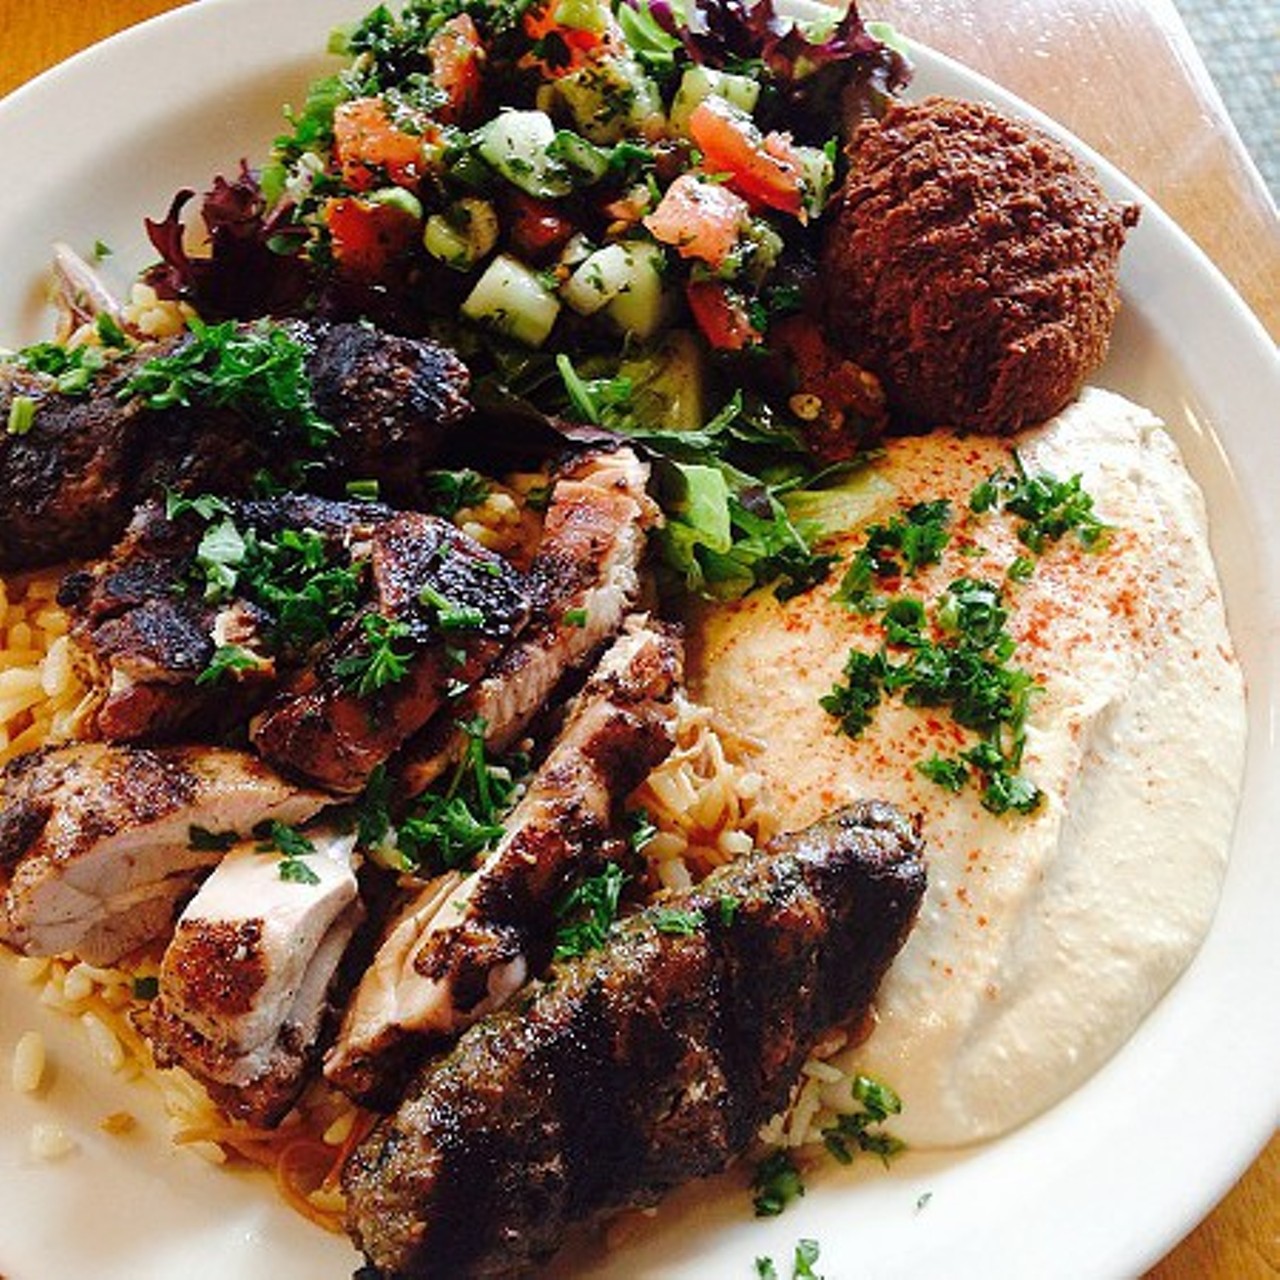 Aladdin's Eatery - 
At Aladdin's, there's plenty of delicious middle eastern dishes that are under $10. Stop in at any of their locations across NEO. (Photo via positivesheila, Instagram)